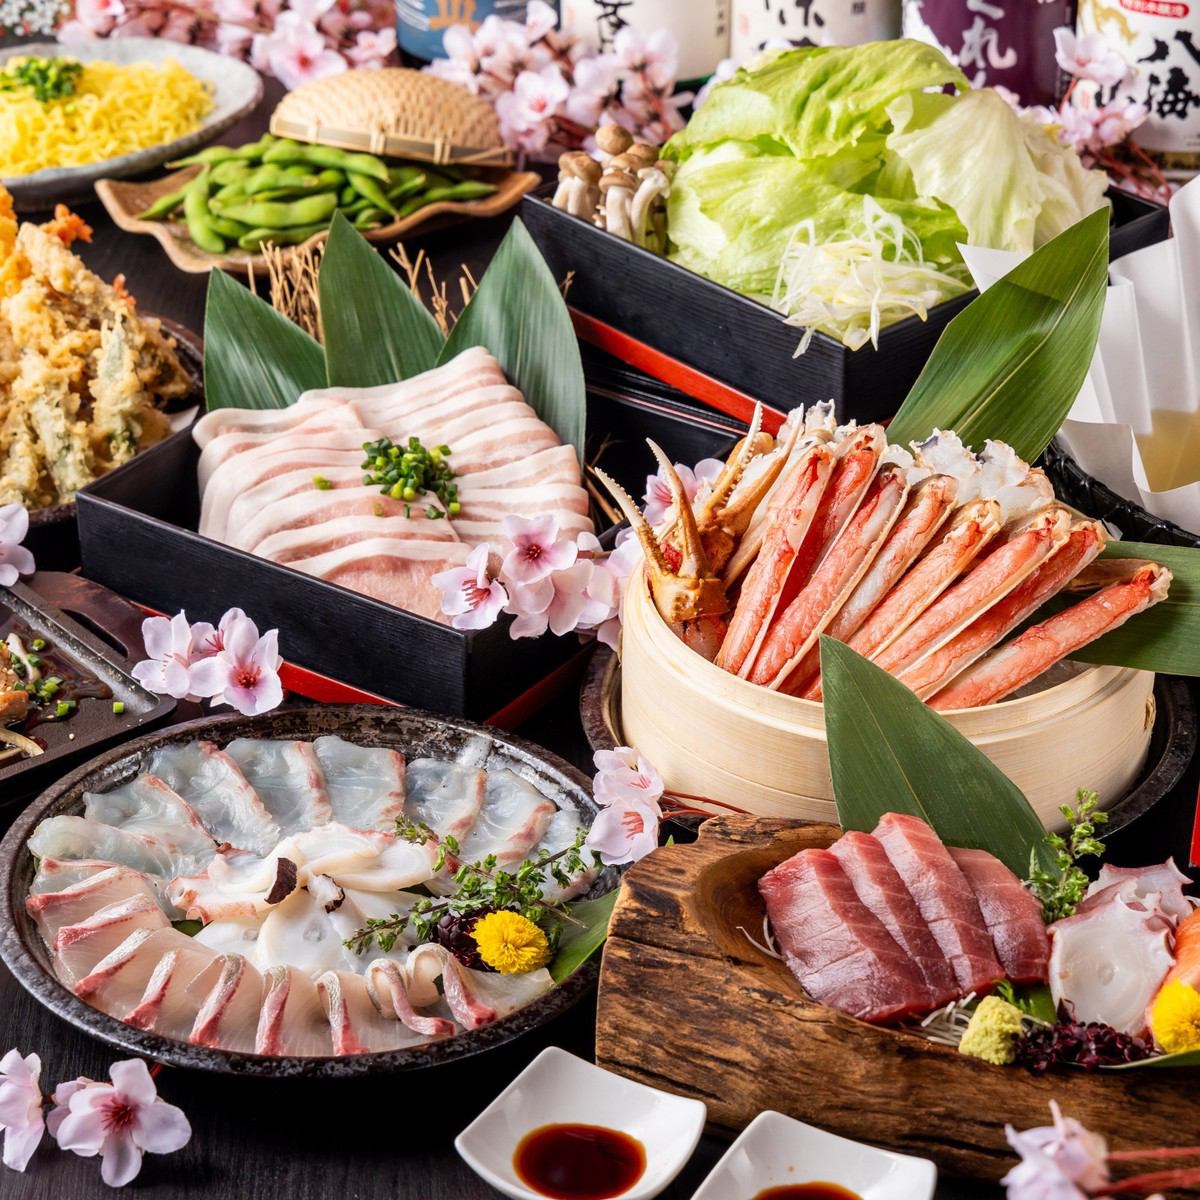 Goku "KIWAMI" course [Raw snow crab & seasonal fish shabu-shabu, etc....luxurious!] 11 dishes in total 8,200 yen ≪3 hours of all-you-can-drink included, recommended for entertainment and farewell parties≫